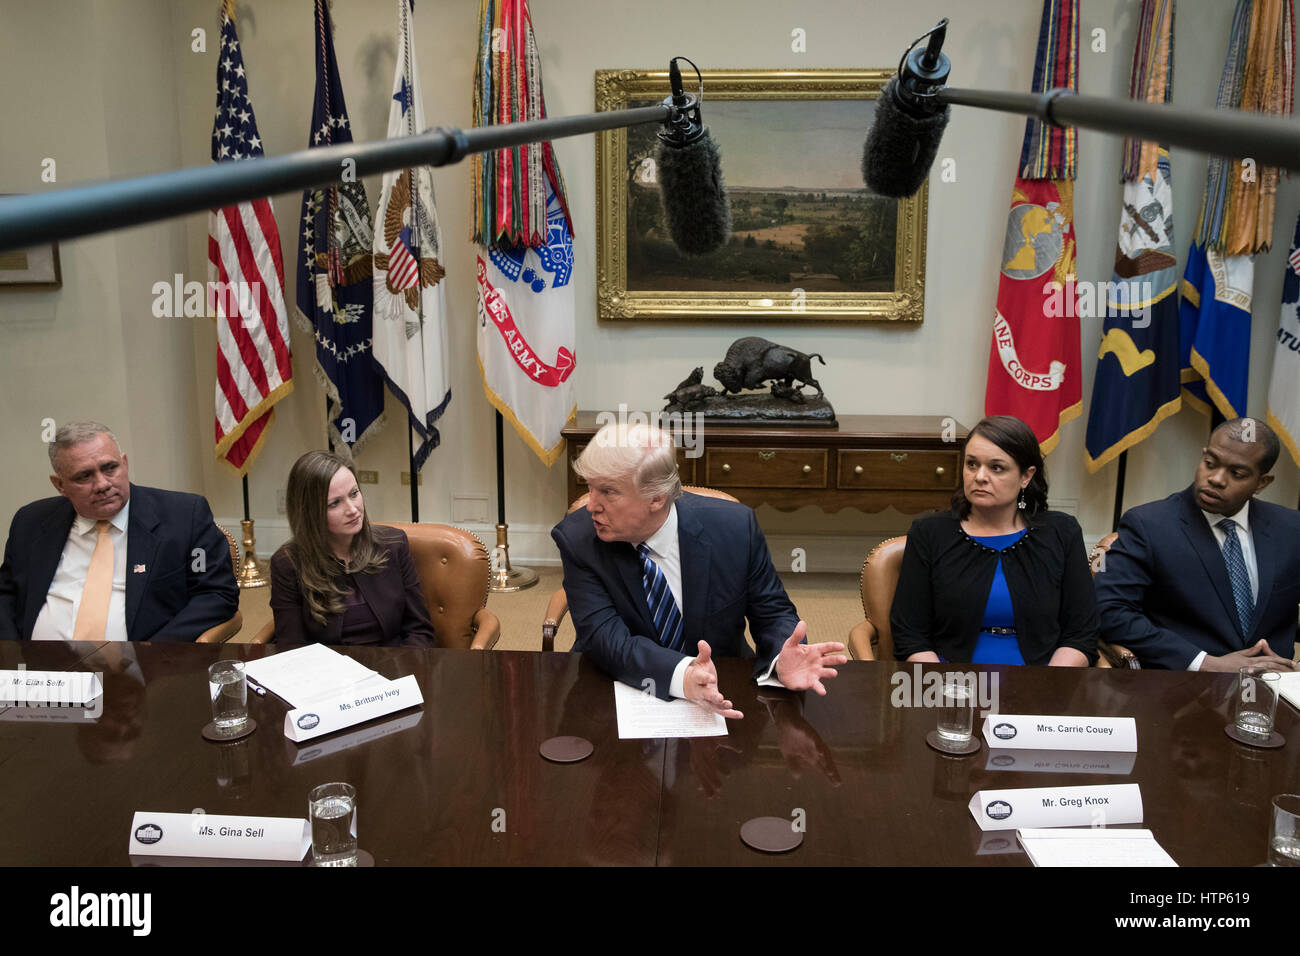 US President Donald J. Trump (C) attends a meeting on healthcare in the Roosevelt Room of the White House in Washington, DC, USA, 13 March 2017. The House Republicans' bill known as the 'American Health Care Act', which is intended to replace the Affordable Care Act and endorsed by President Trump, has faced criticism from both Republicans and Democrats. Also in this picture is Kim Elias Seife (L) of Florida, Brittany Ivey (2-L) of Georgia, Carrie Couey (2-R) of Colorado and Louis Brown (R) of Virginia. Credit: Michael Reynolds/Pool via CNP · NO WIRE SERVICE · Photo: Michael Reynolds/C Stock Photo